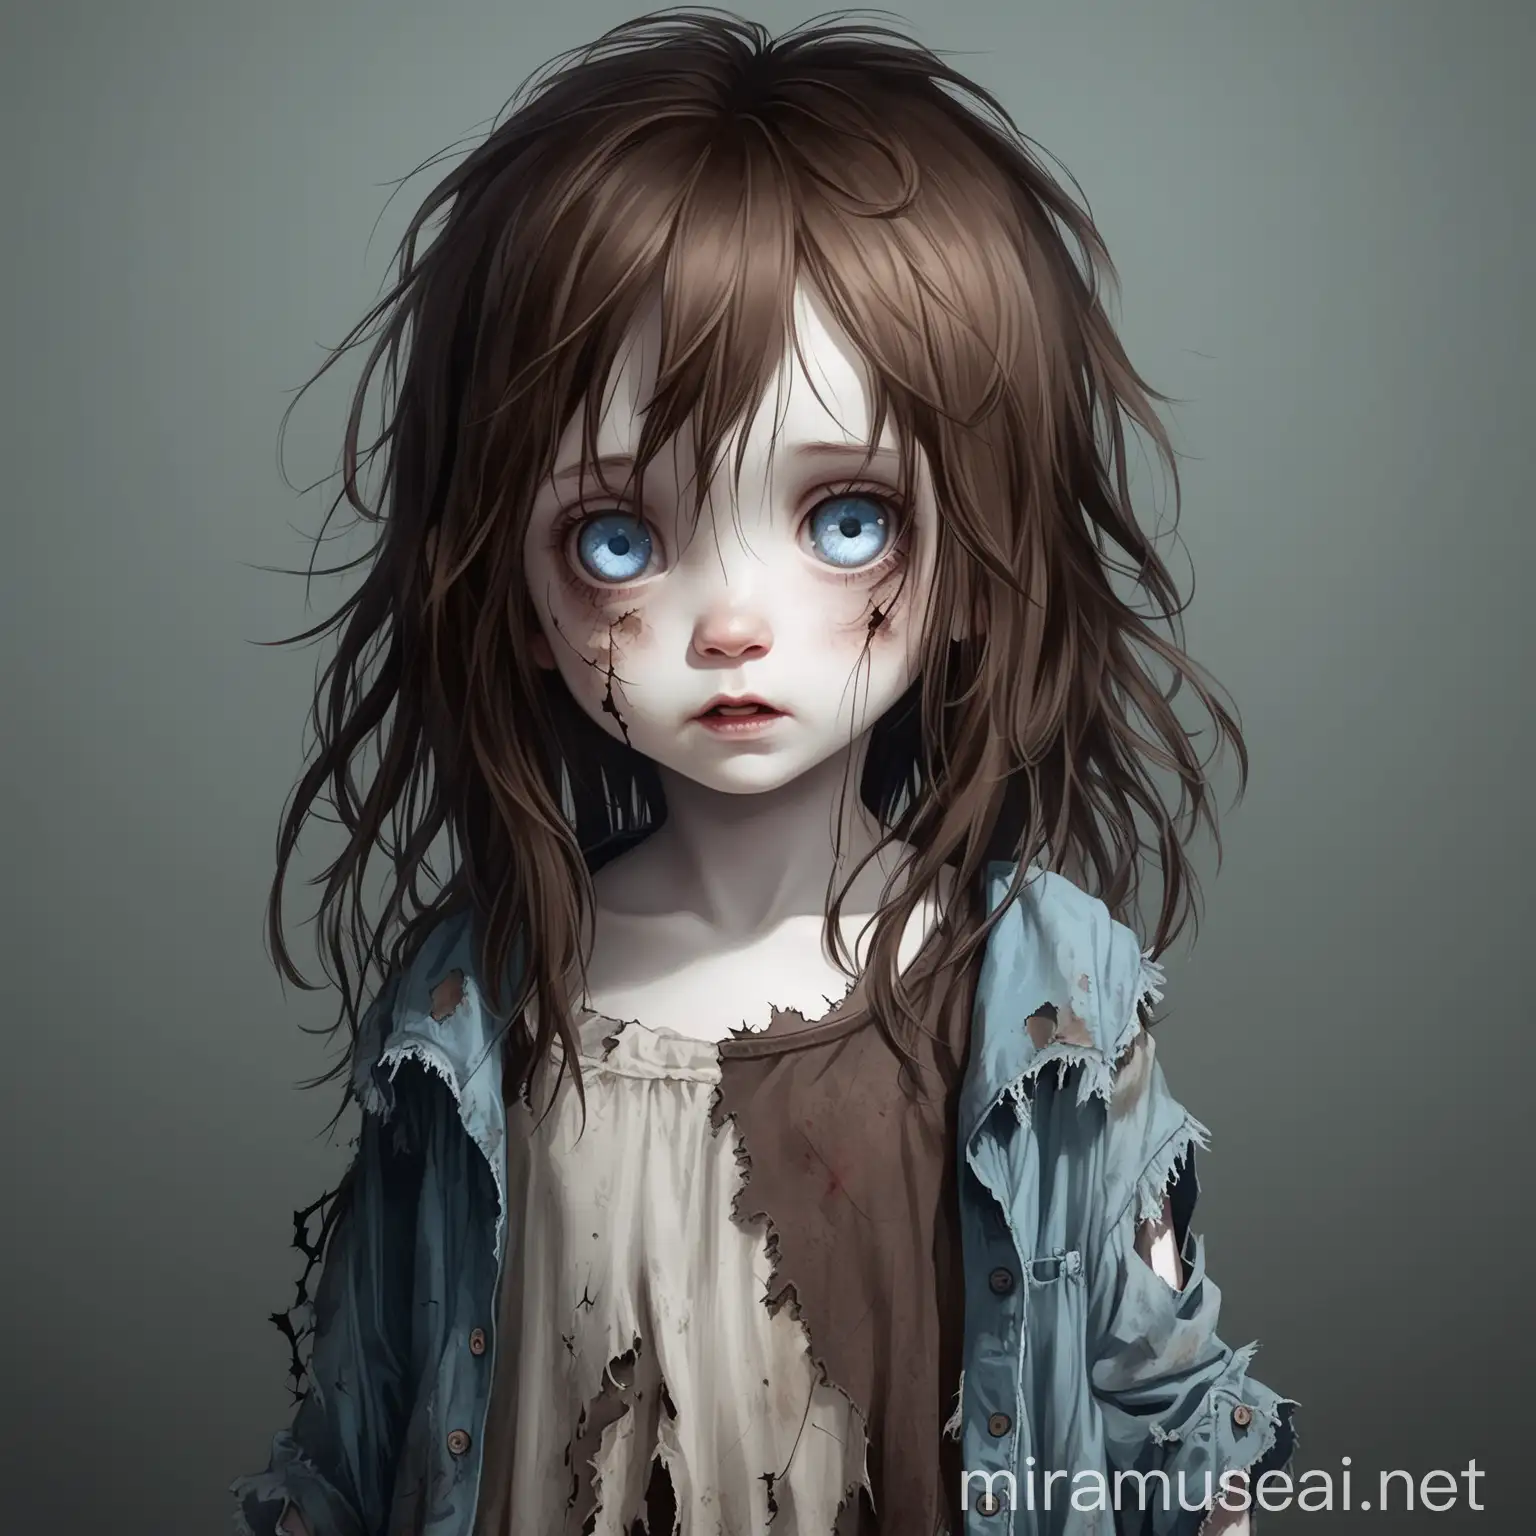 A cute little girl with messy brown hair, pale skin and blue eyes  wearing tattered clothes.